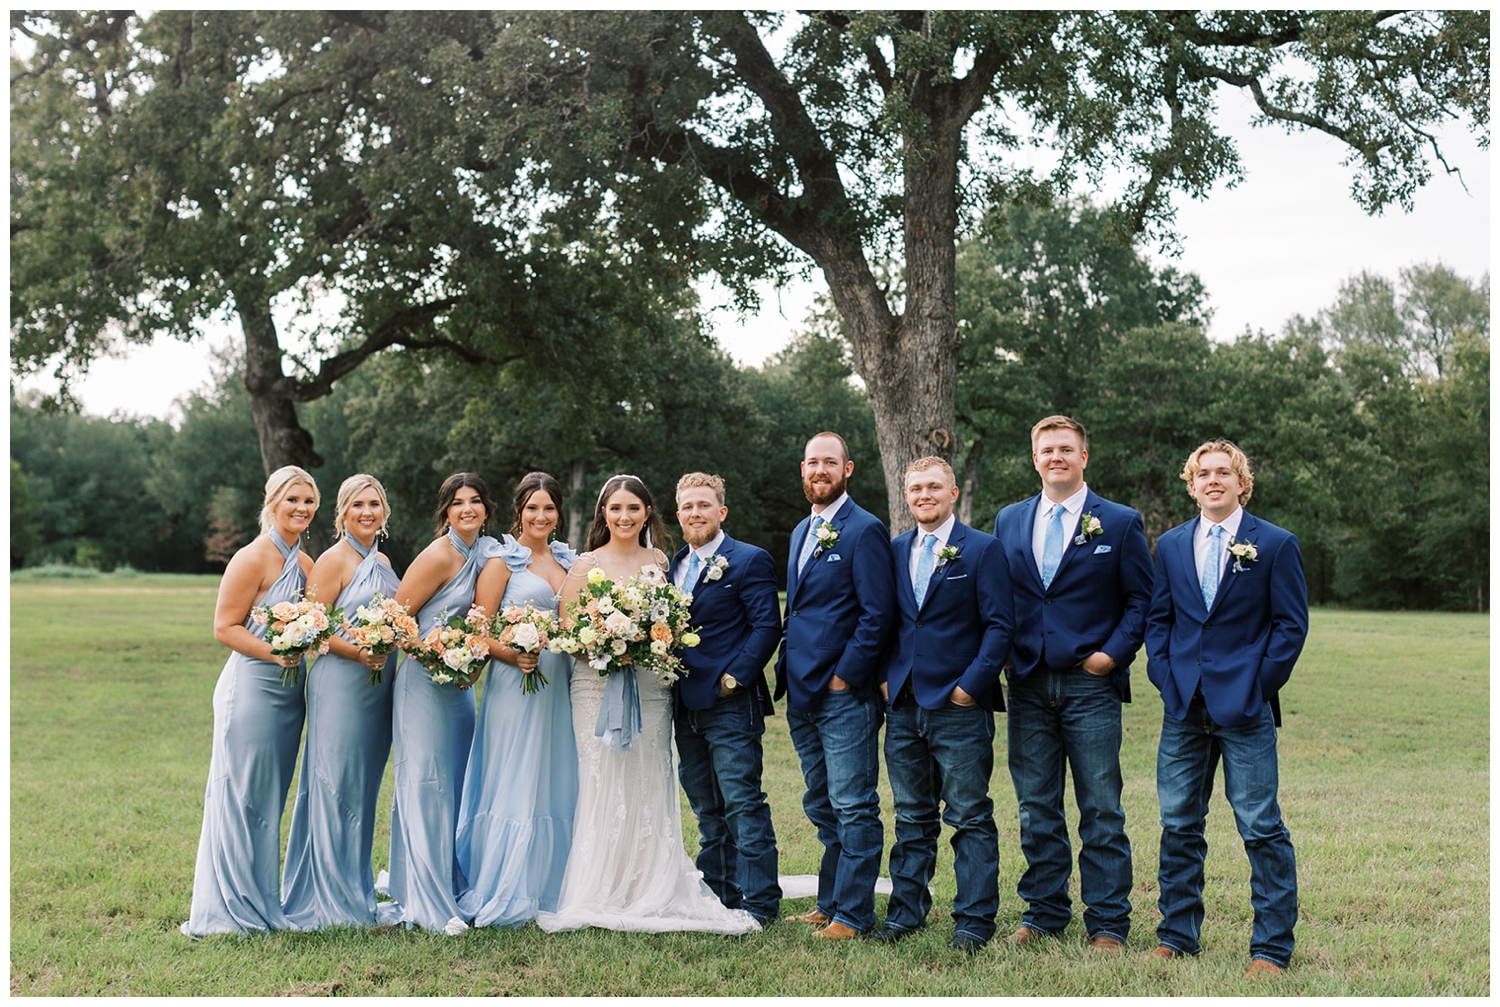 full wedding party in blue with bride and groom standing in middle outside at Bluebird Haven Estates Wedding venue